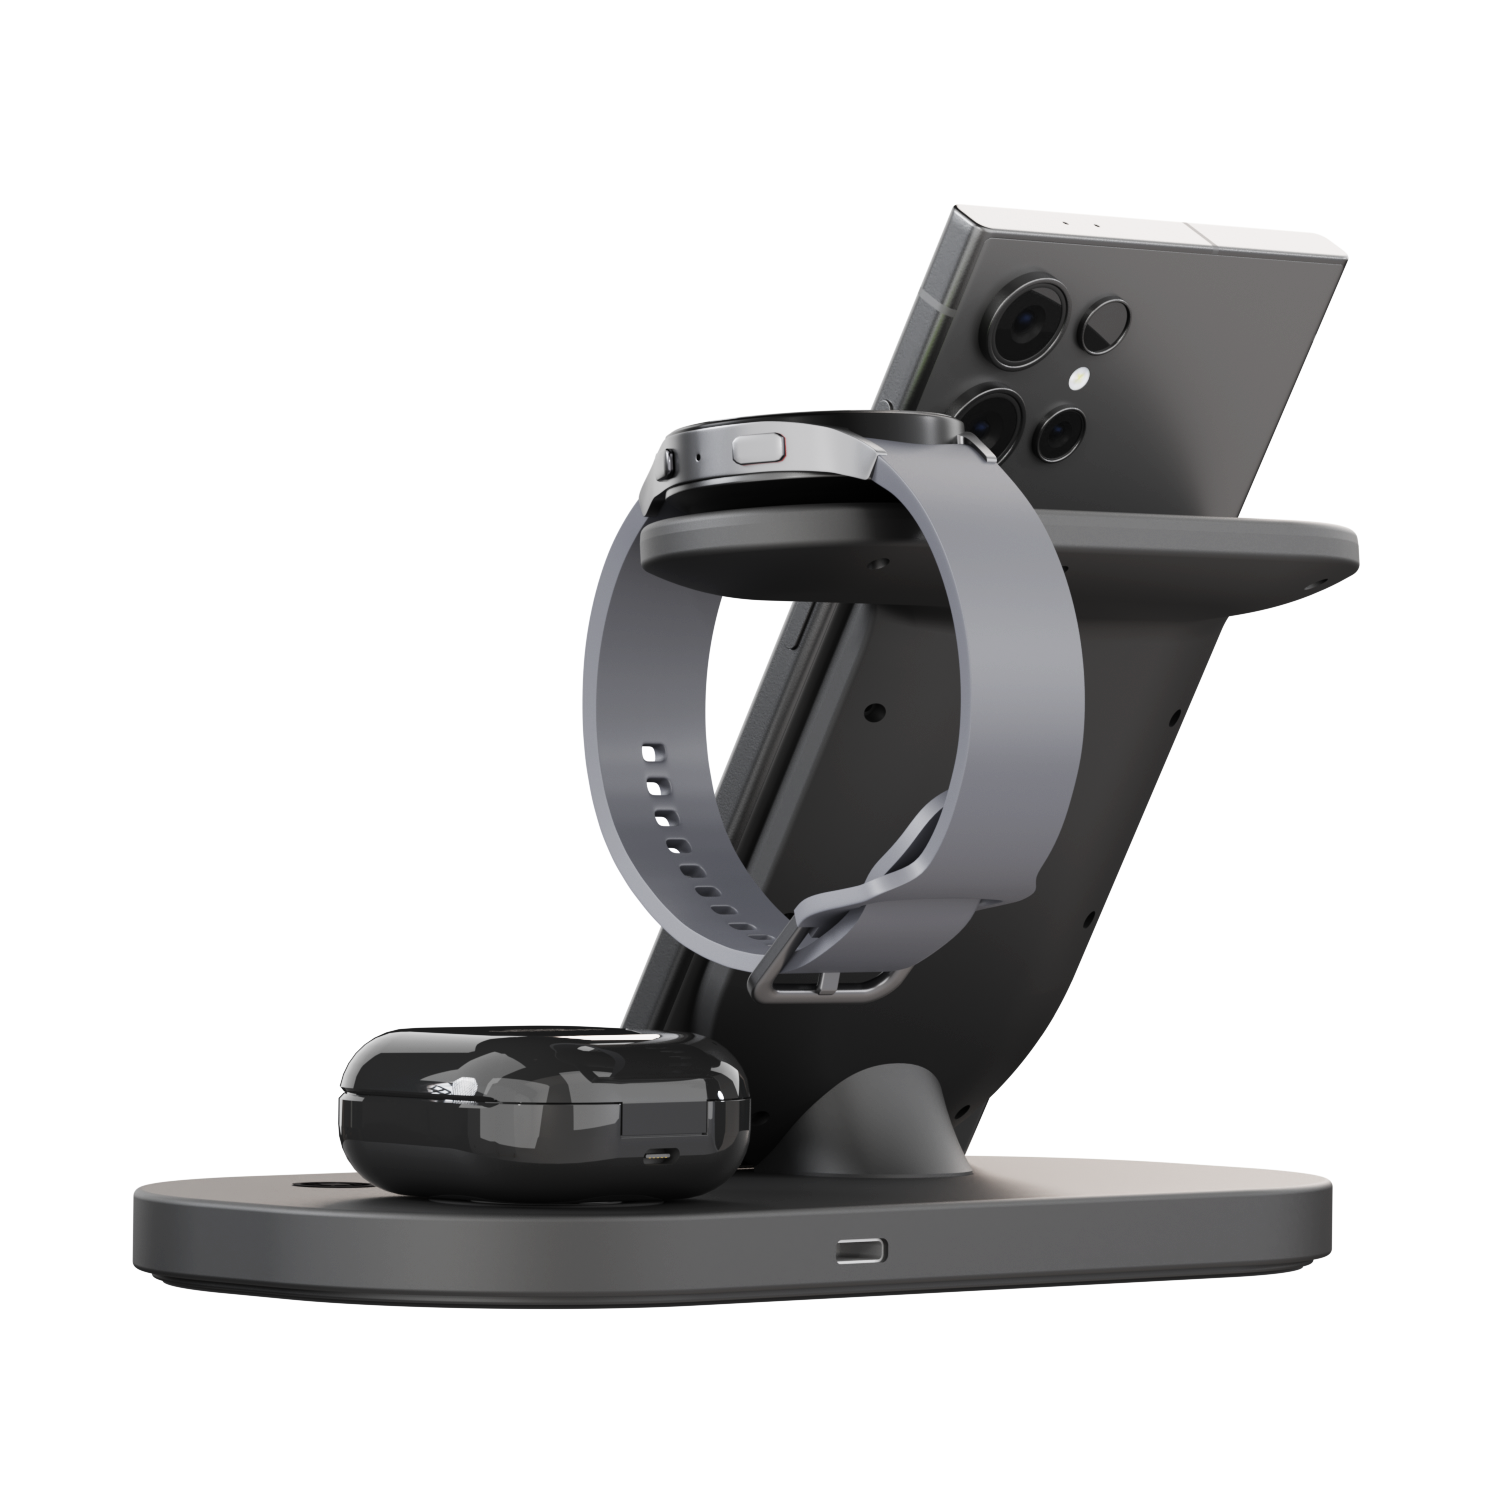 iCharger Samsung Pro wireless charging stand elegantly displaying a smartphone, smartwatch, and earbuds, highlighting the multi-device charging feature.